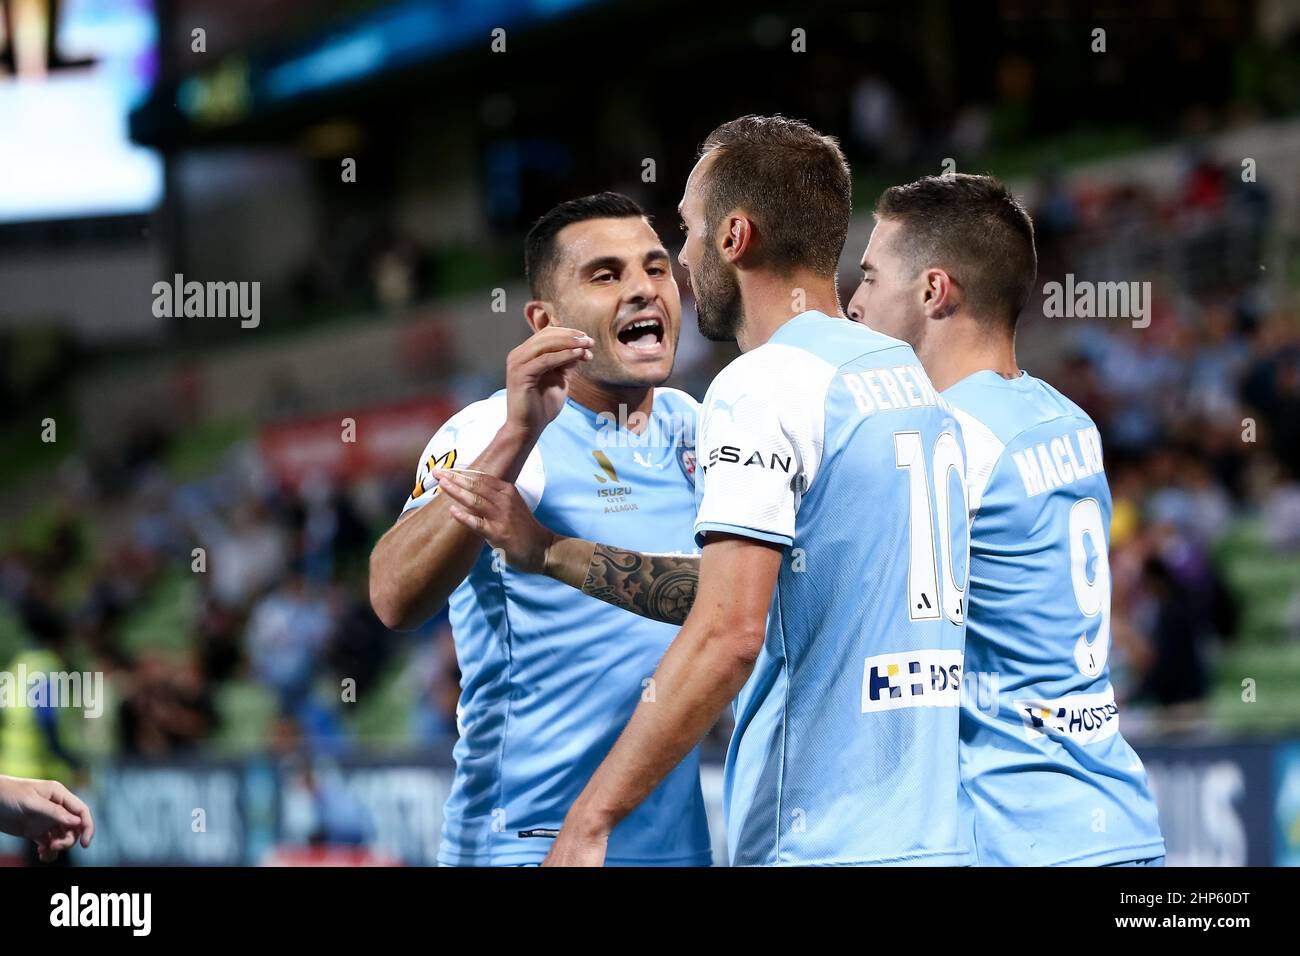 Melbourne, Australia, 18 February, 2022. Jamie Maclaren of Melbourne City FC celebrates kicking a goal during the A-League soccer match between Melbourne City FC and Newcastle Jets at AAMI Park on February 18, 2022 in Melbourne, Australia. Credit: Dave Hewison/Speed Media/Alamy Live News Stock Photo